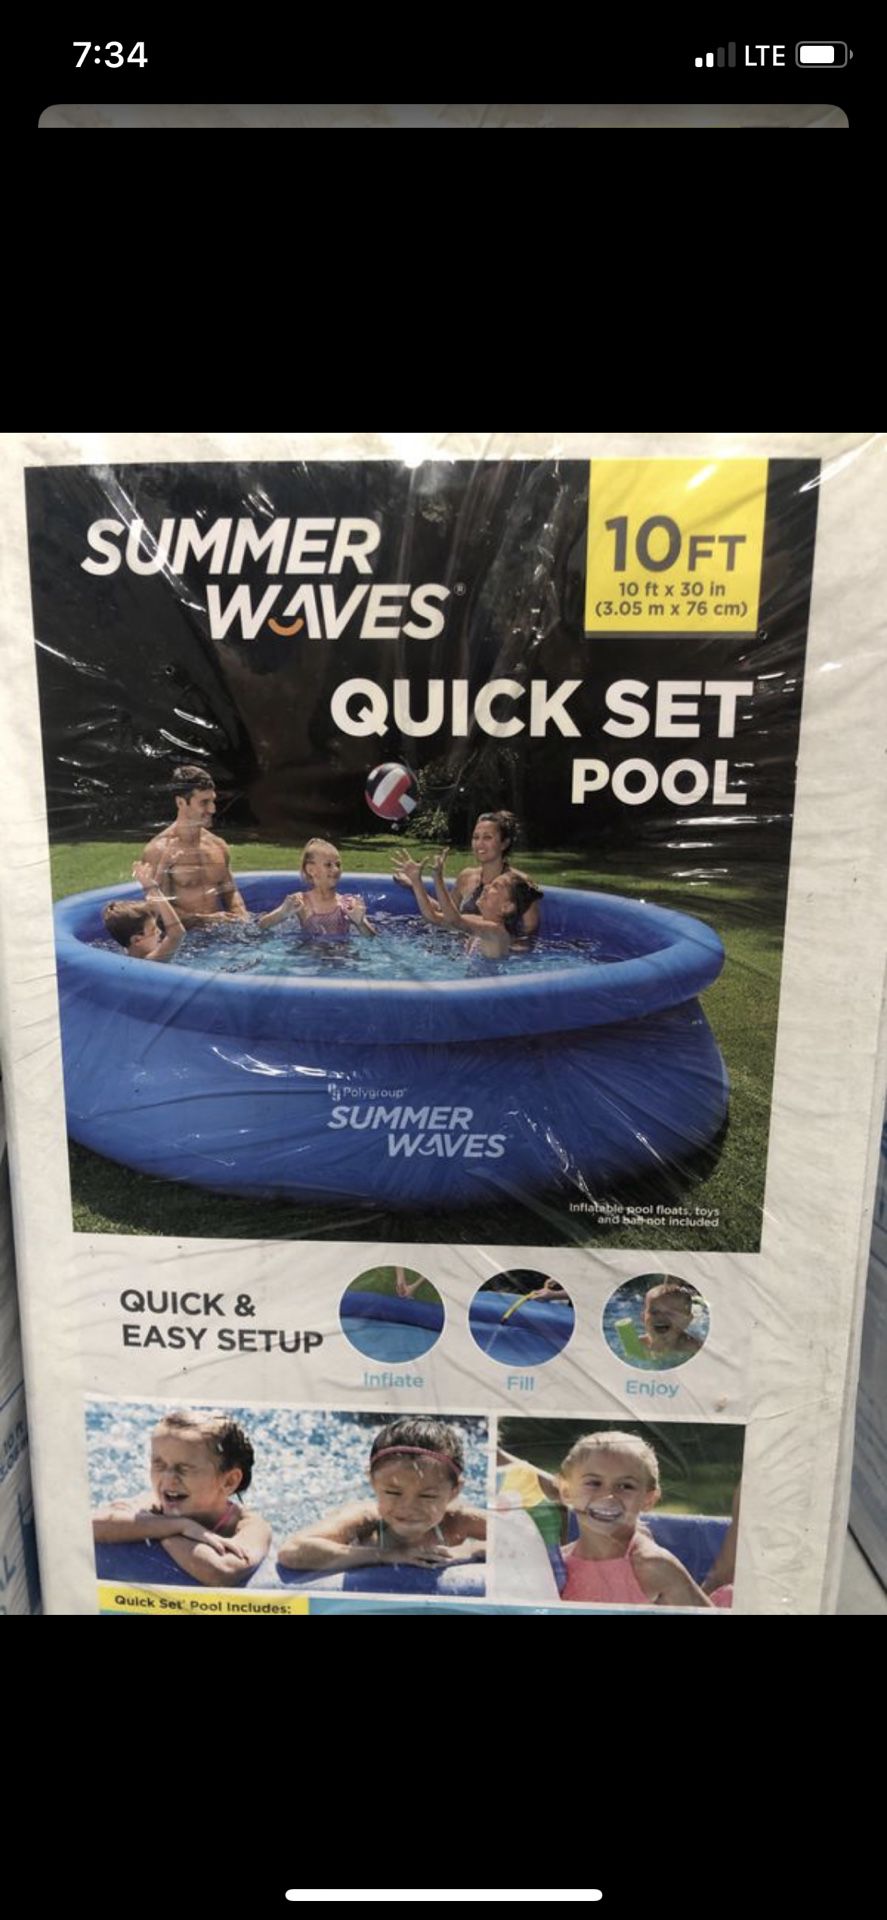 Summer Waves 10’x30”Above Ground Inflatable Ring Pool W/Filter,Pump Brand New